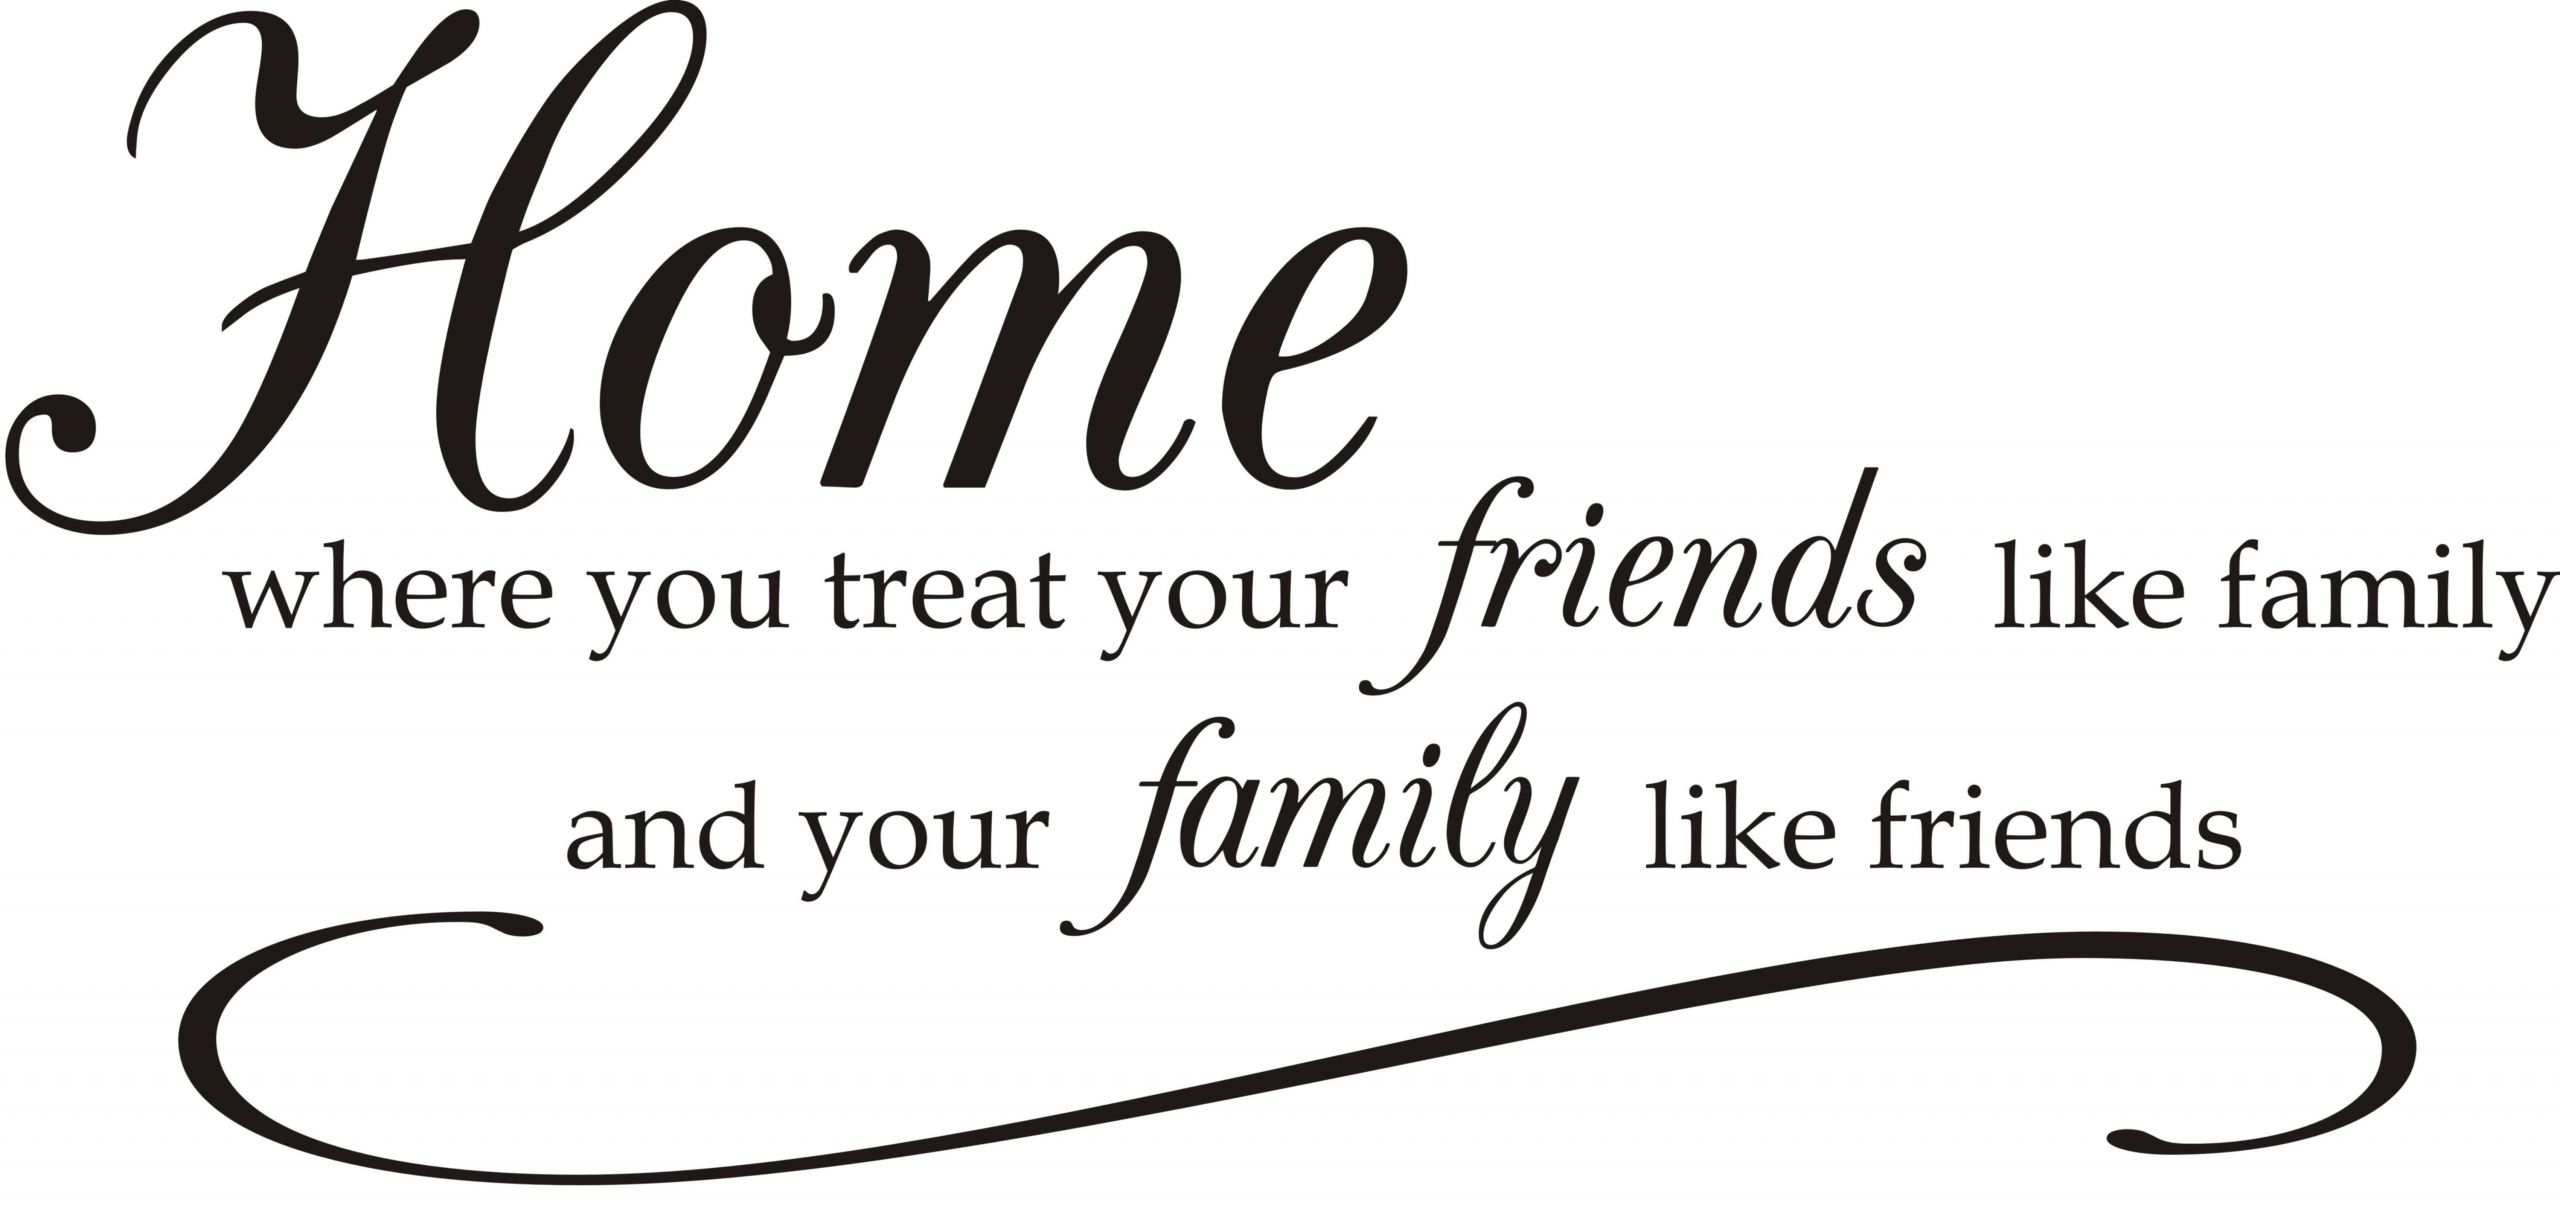 Friends Like Family Quote
 Home Where You Treat Friends Like Family Quote the Walls